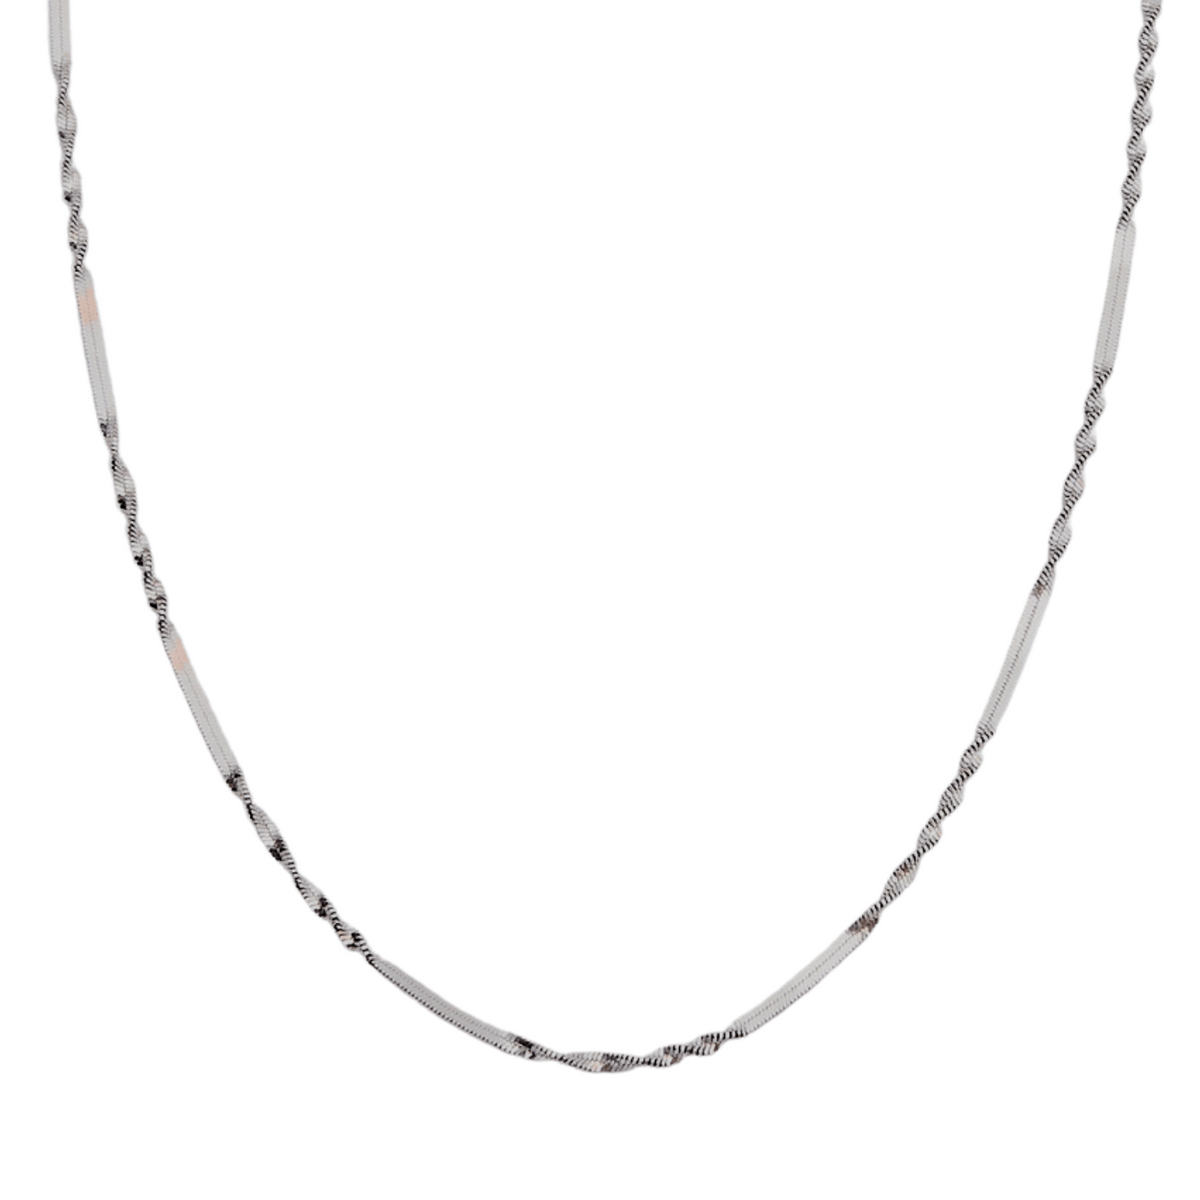 Half Twisted Sterling Silver Chain Necklace Singapore Chain